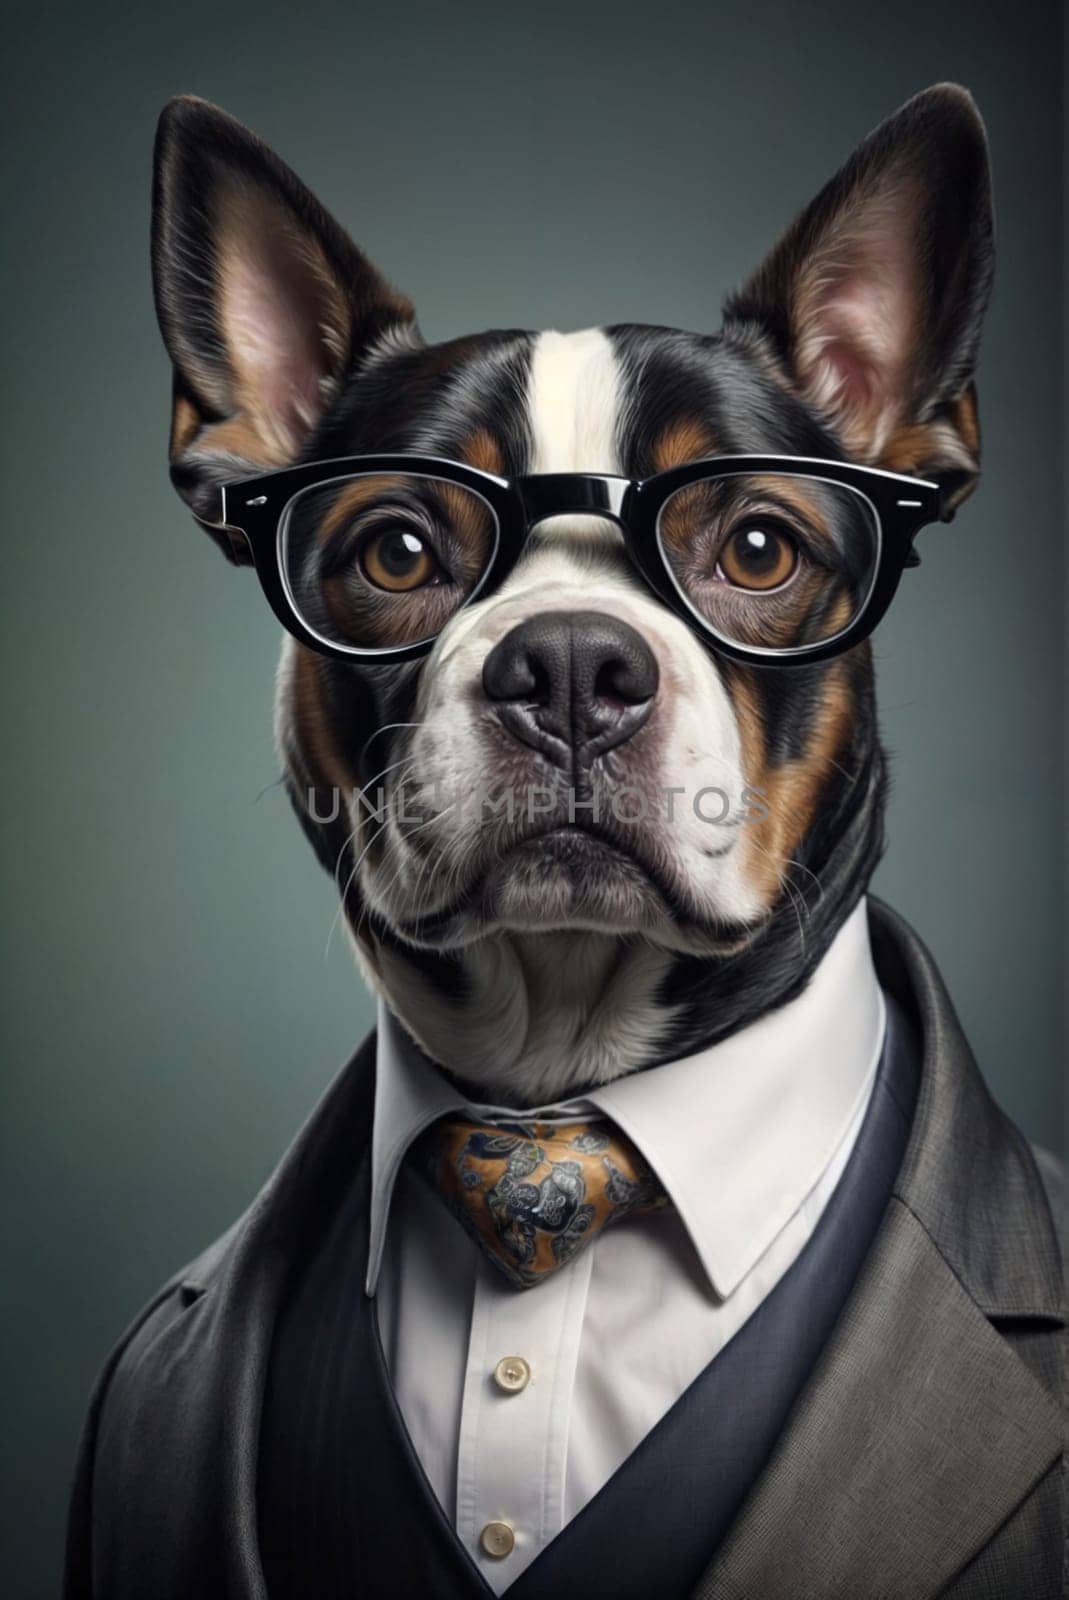 Anthropomorphic dog portrait, dressed in formal suit, wear glasses, standing upright, funny card by verbano